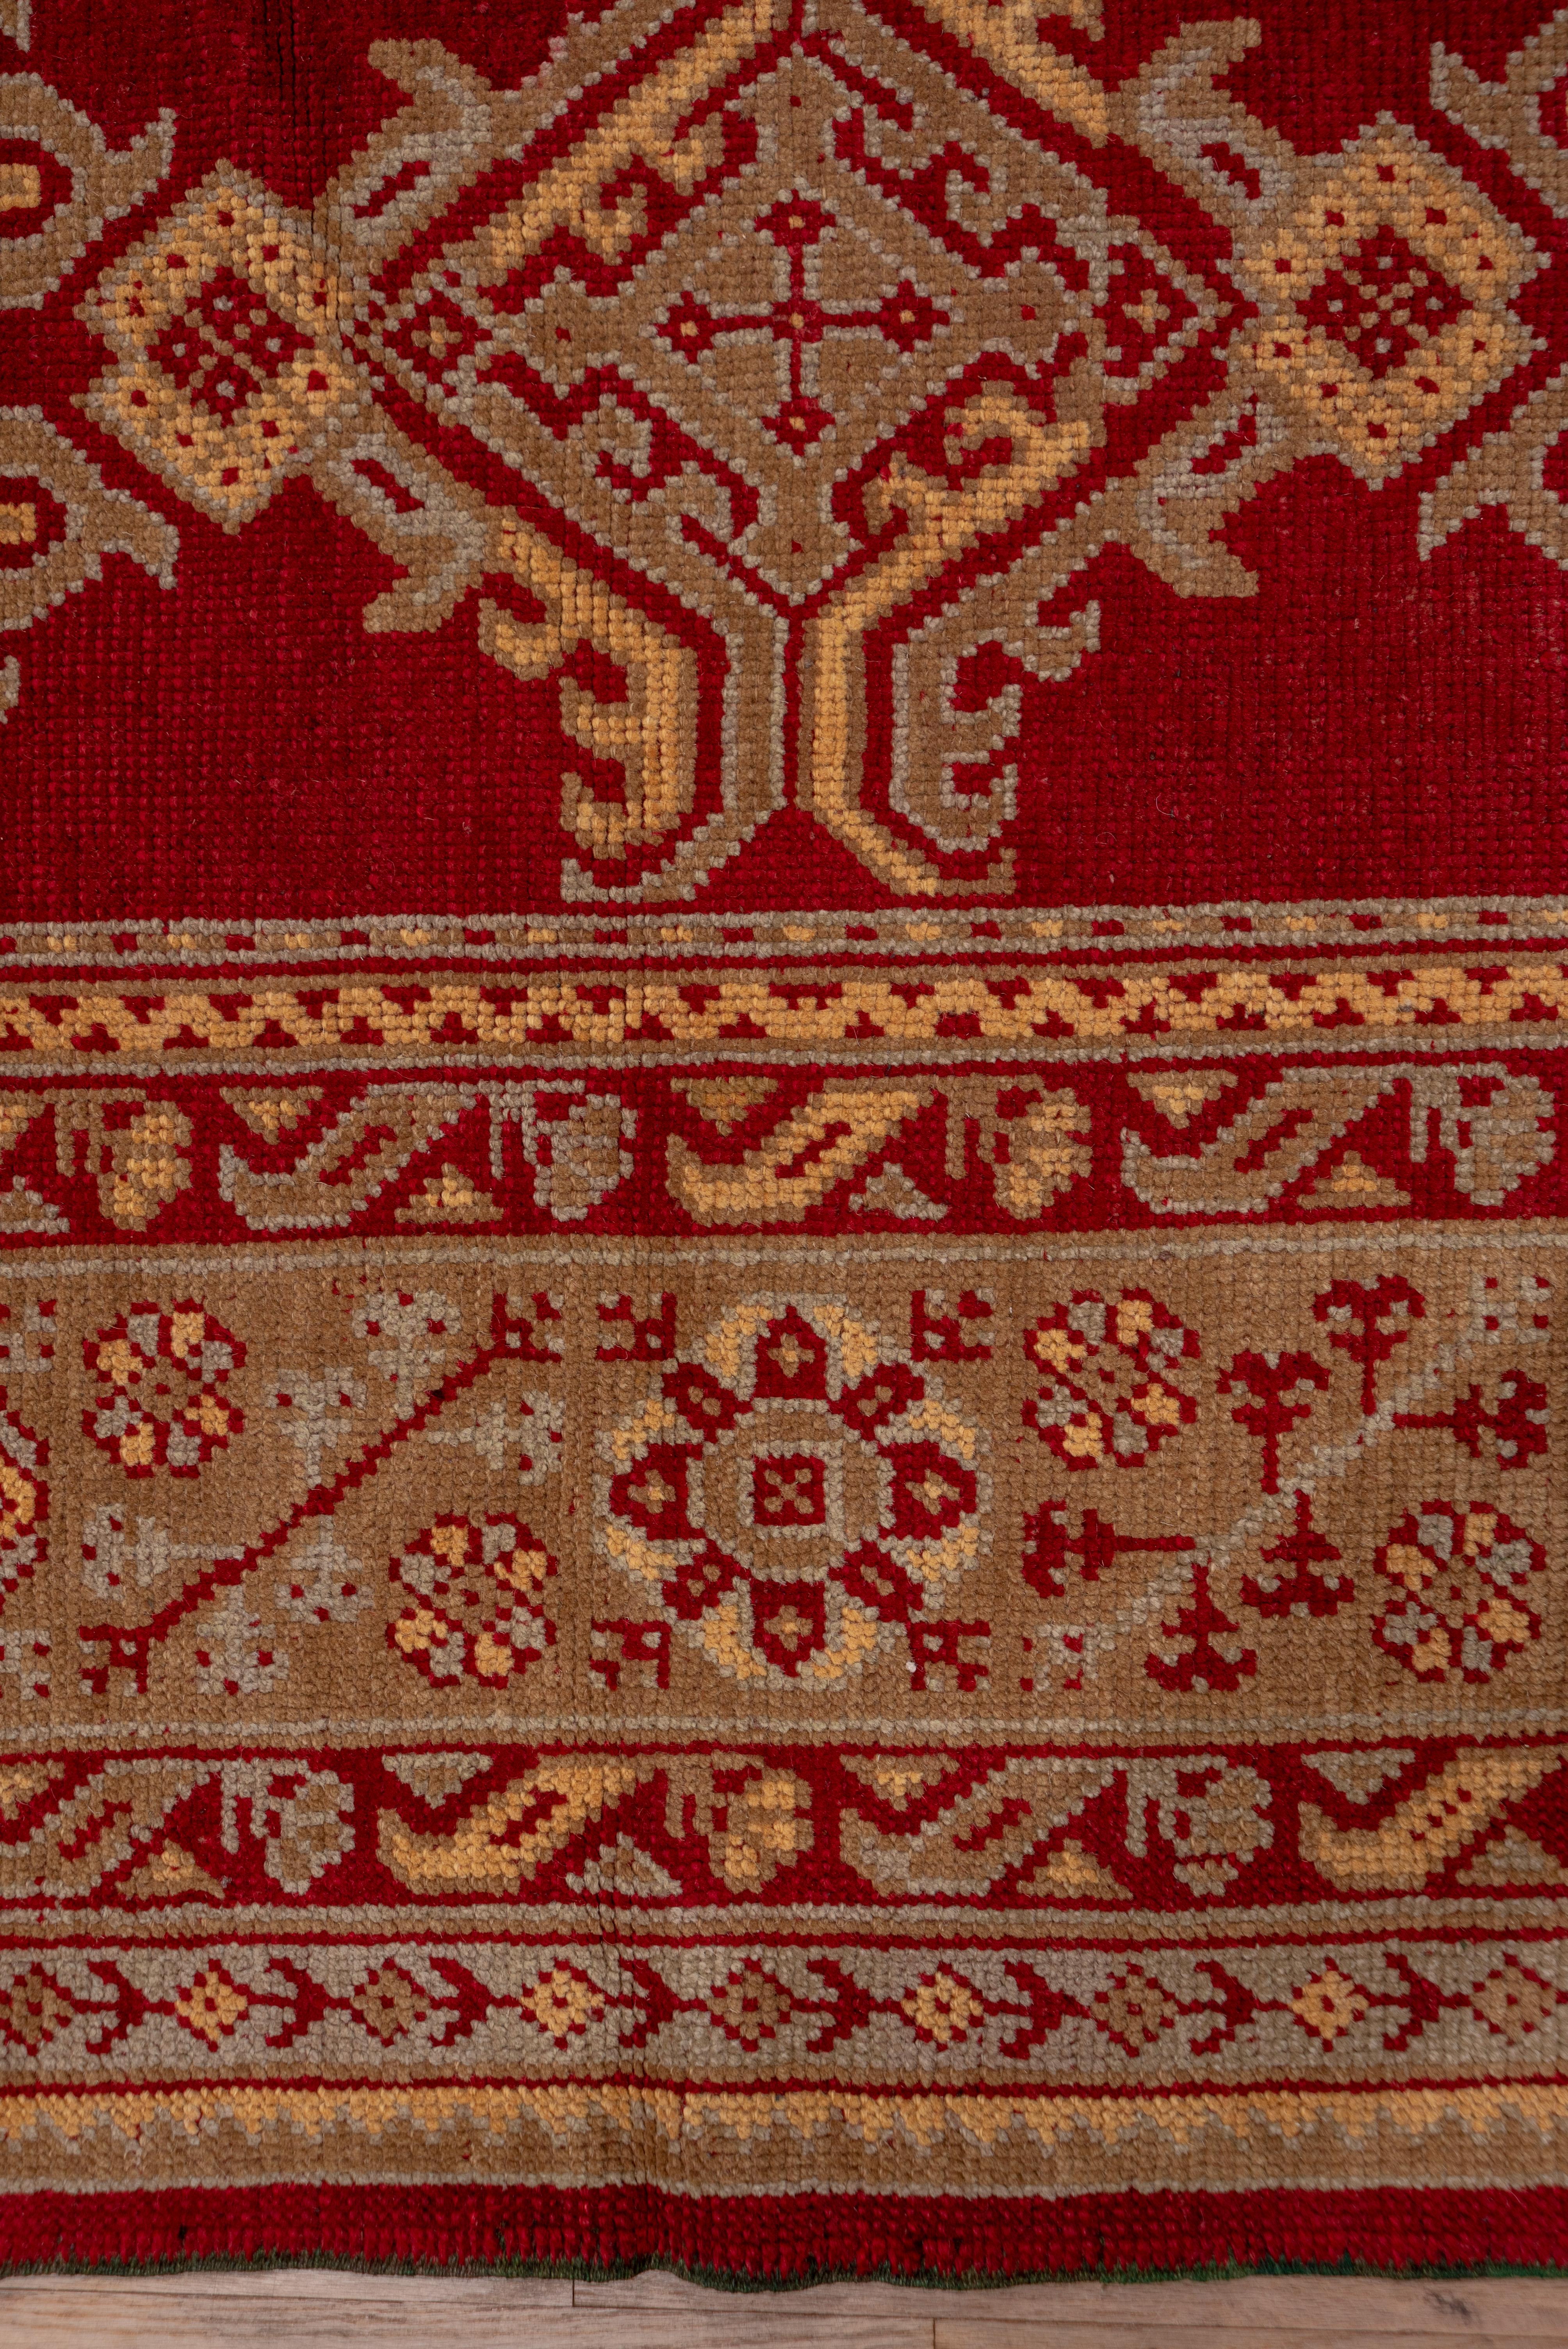 Antique Turkish Oushak Square Wool Rug, Red Allover Field, Circa 1920s For Sale 2